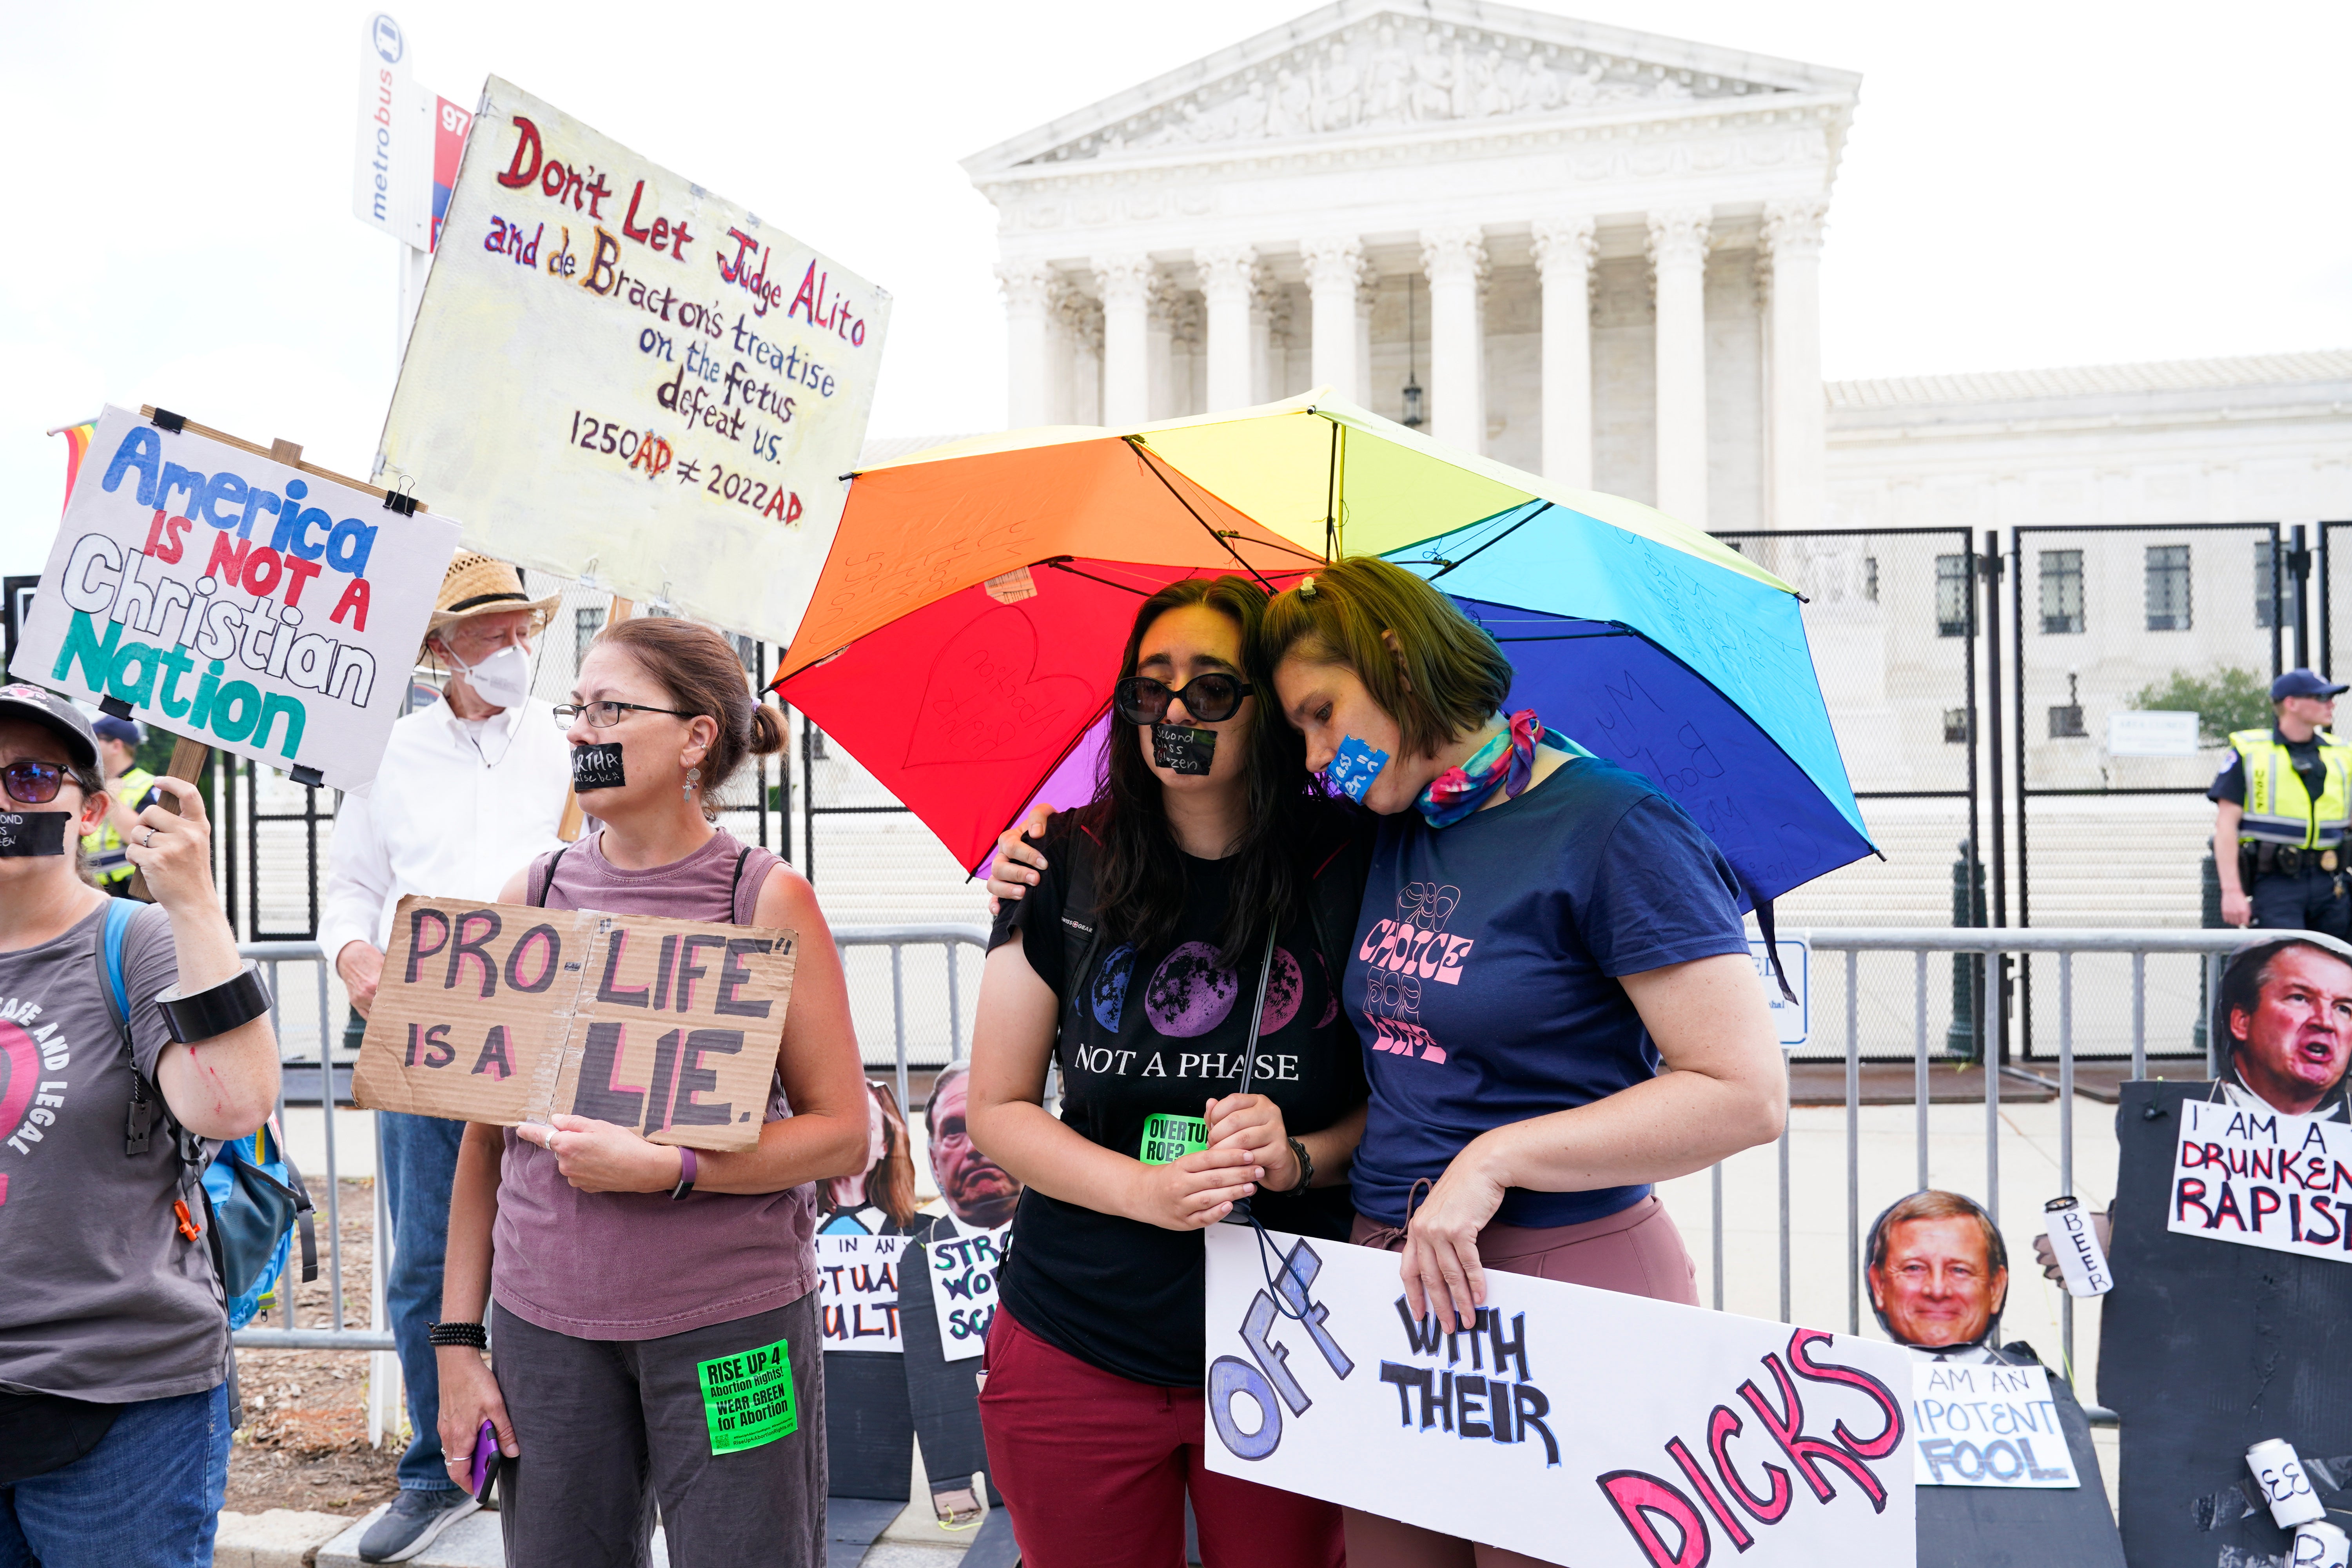 Some states are set to ban abortions even when the woman has got pregnant as a result of rape or incest or when the woman’s life is at risk due to pregnancy complications.